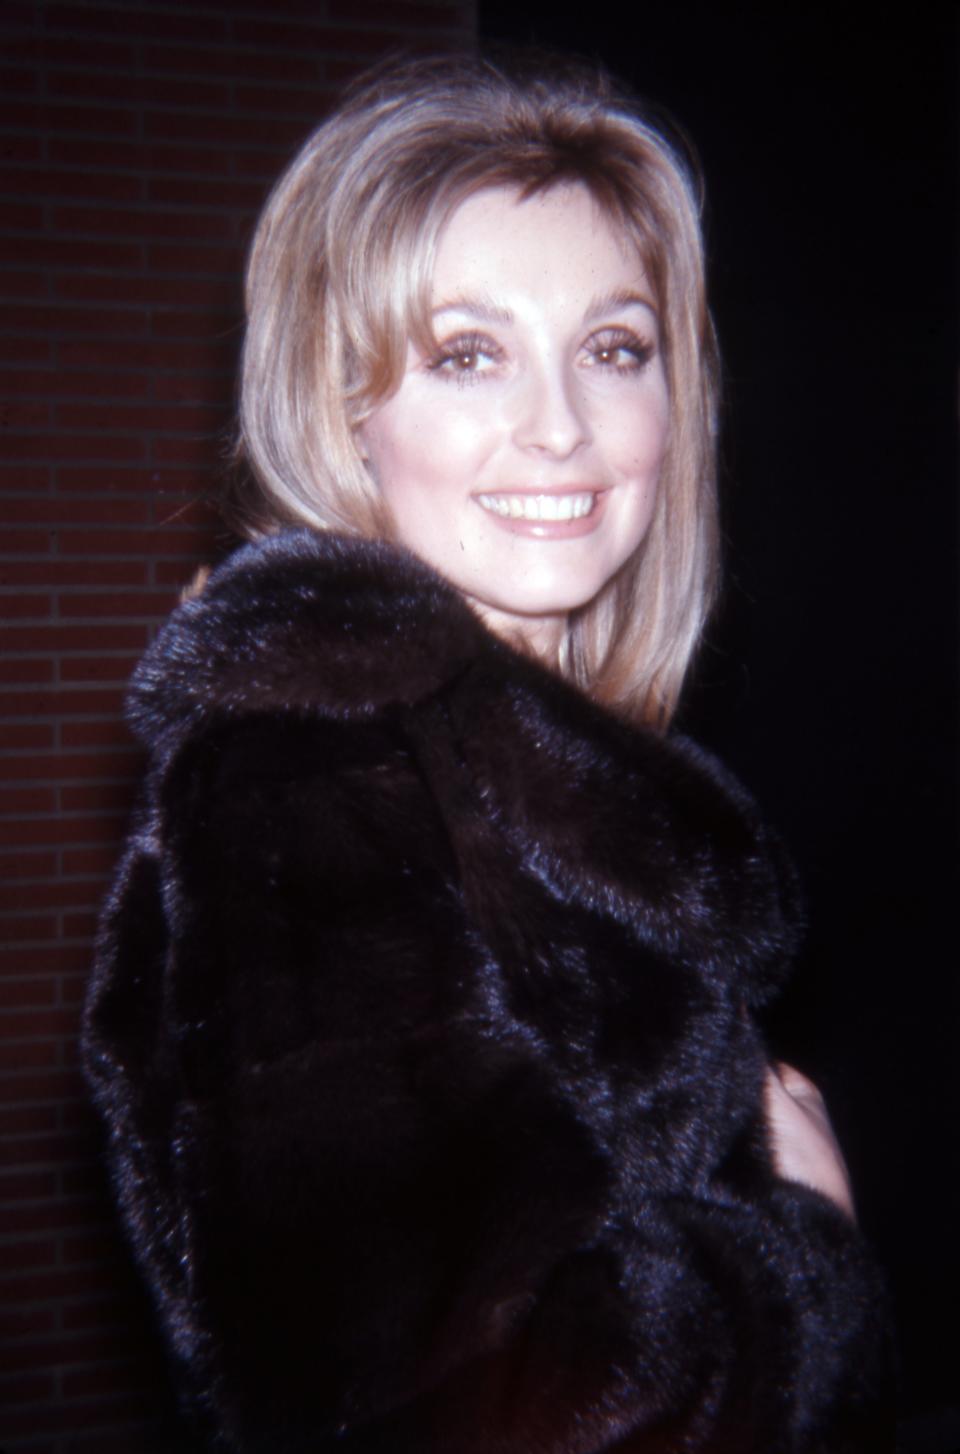 A photo of actress and model Sharon Tate.